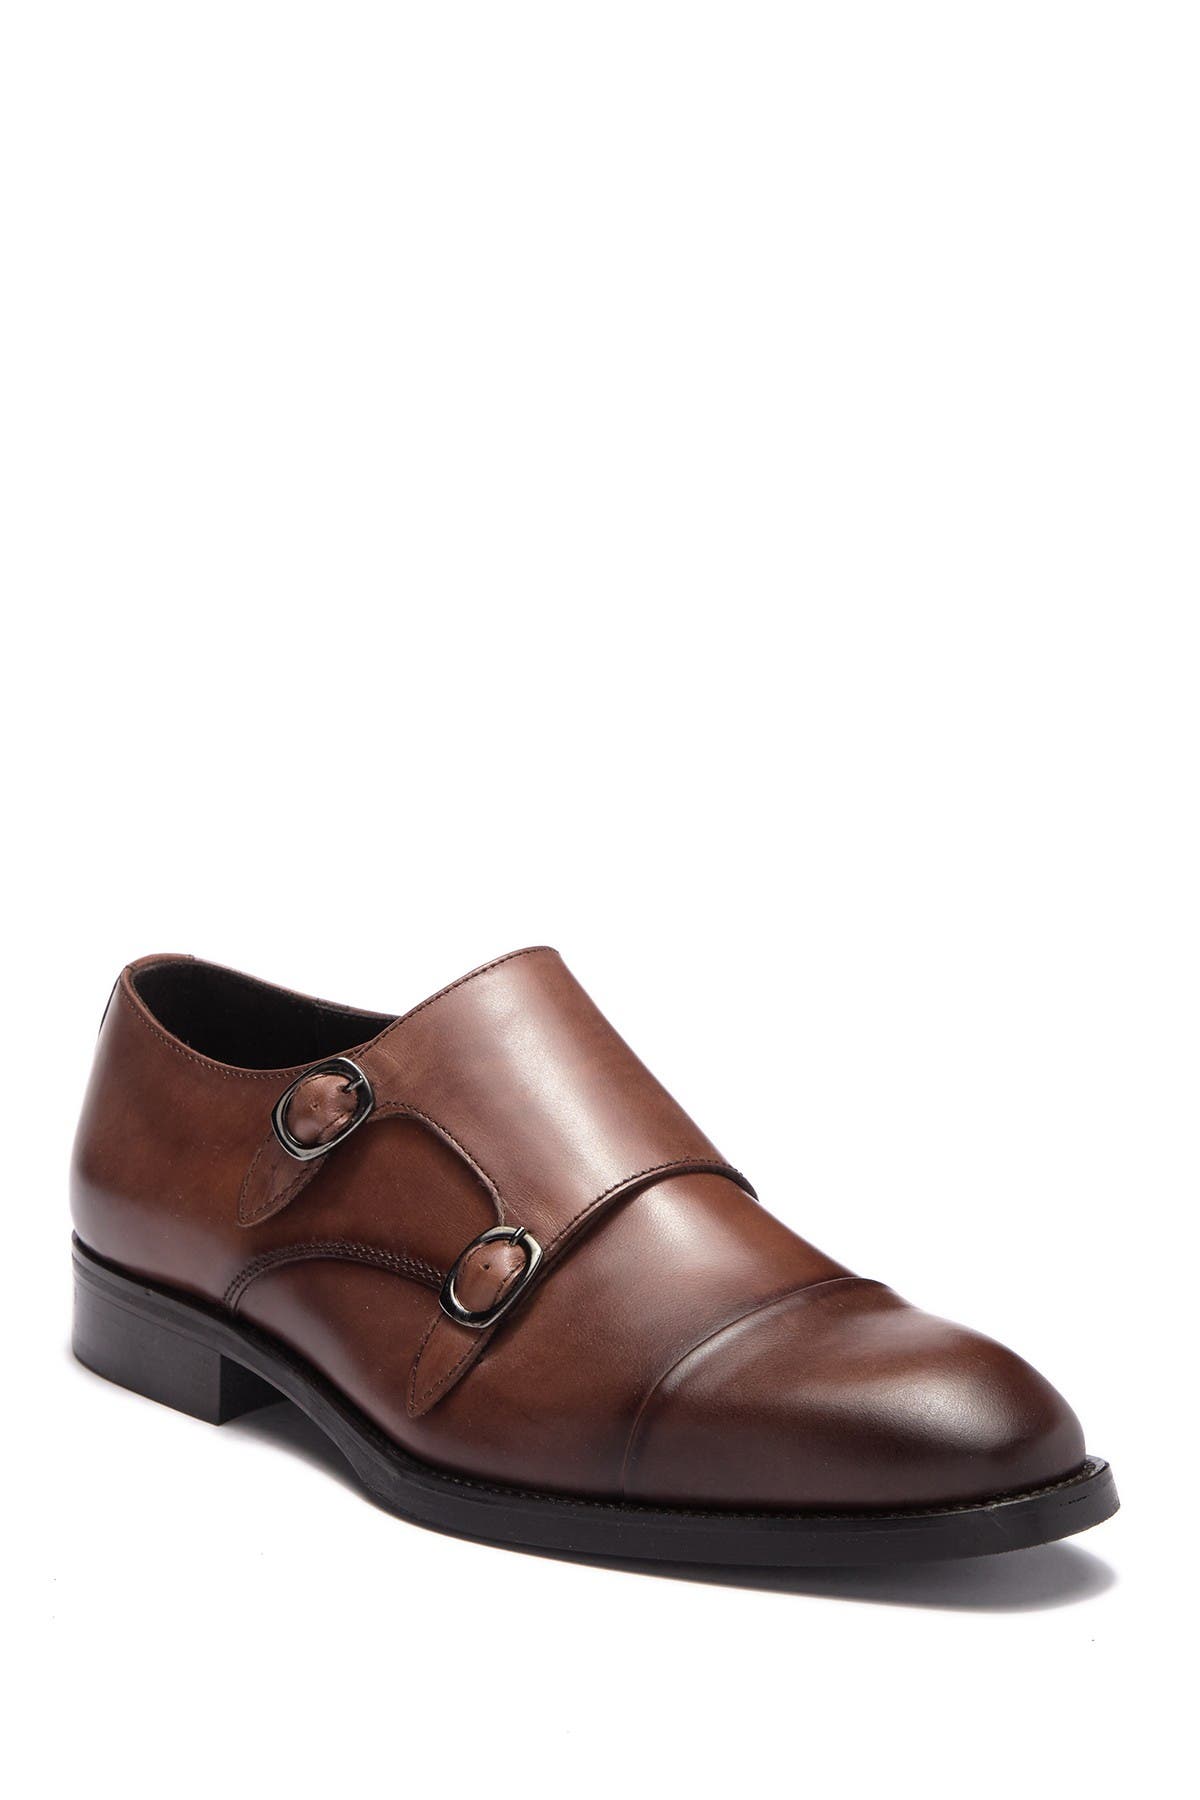 Barata Leather Double Monk Strap Loafer 